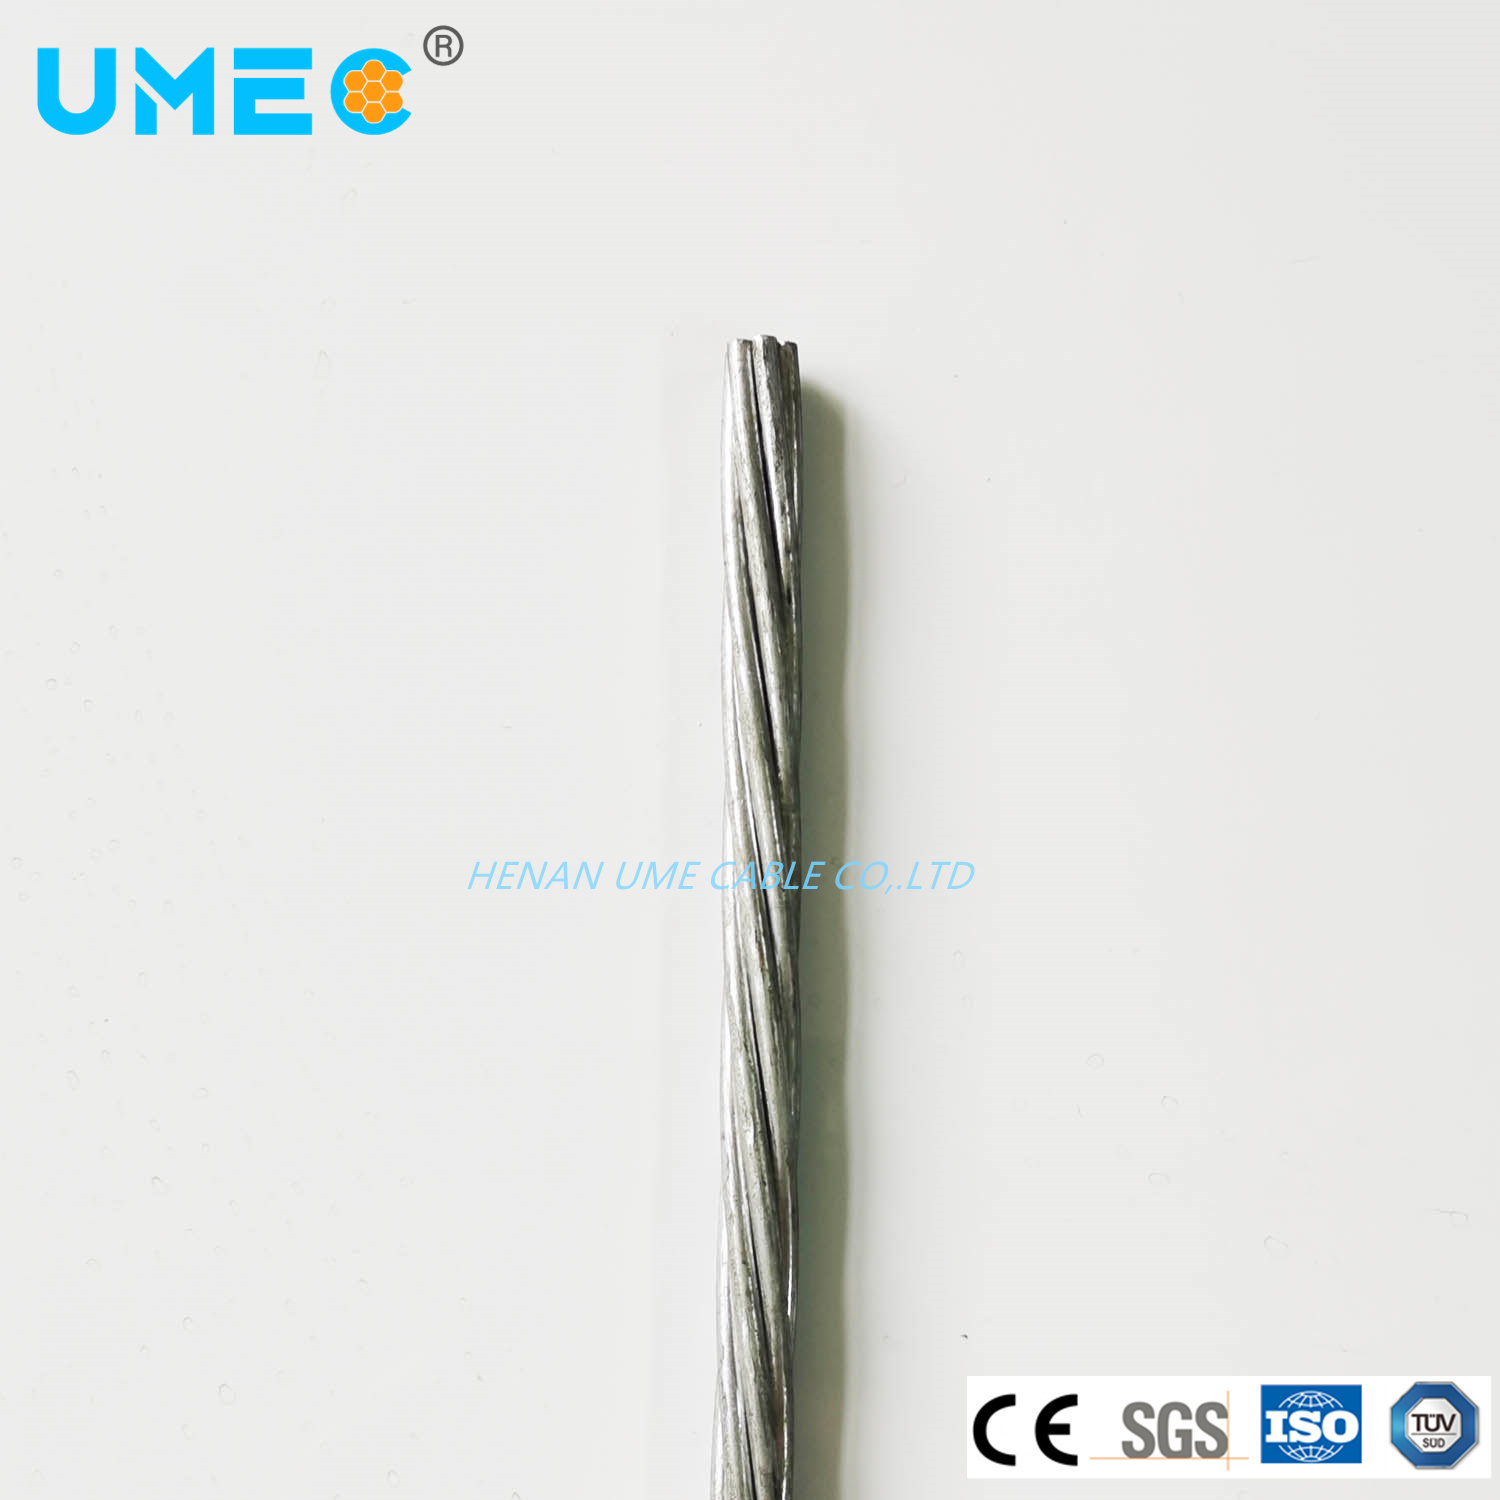 Widely Used Wire Bare Conductor Concentrically Strand Wire Galvanized Steel Wire Strand